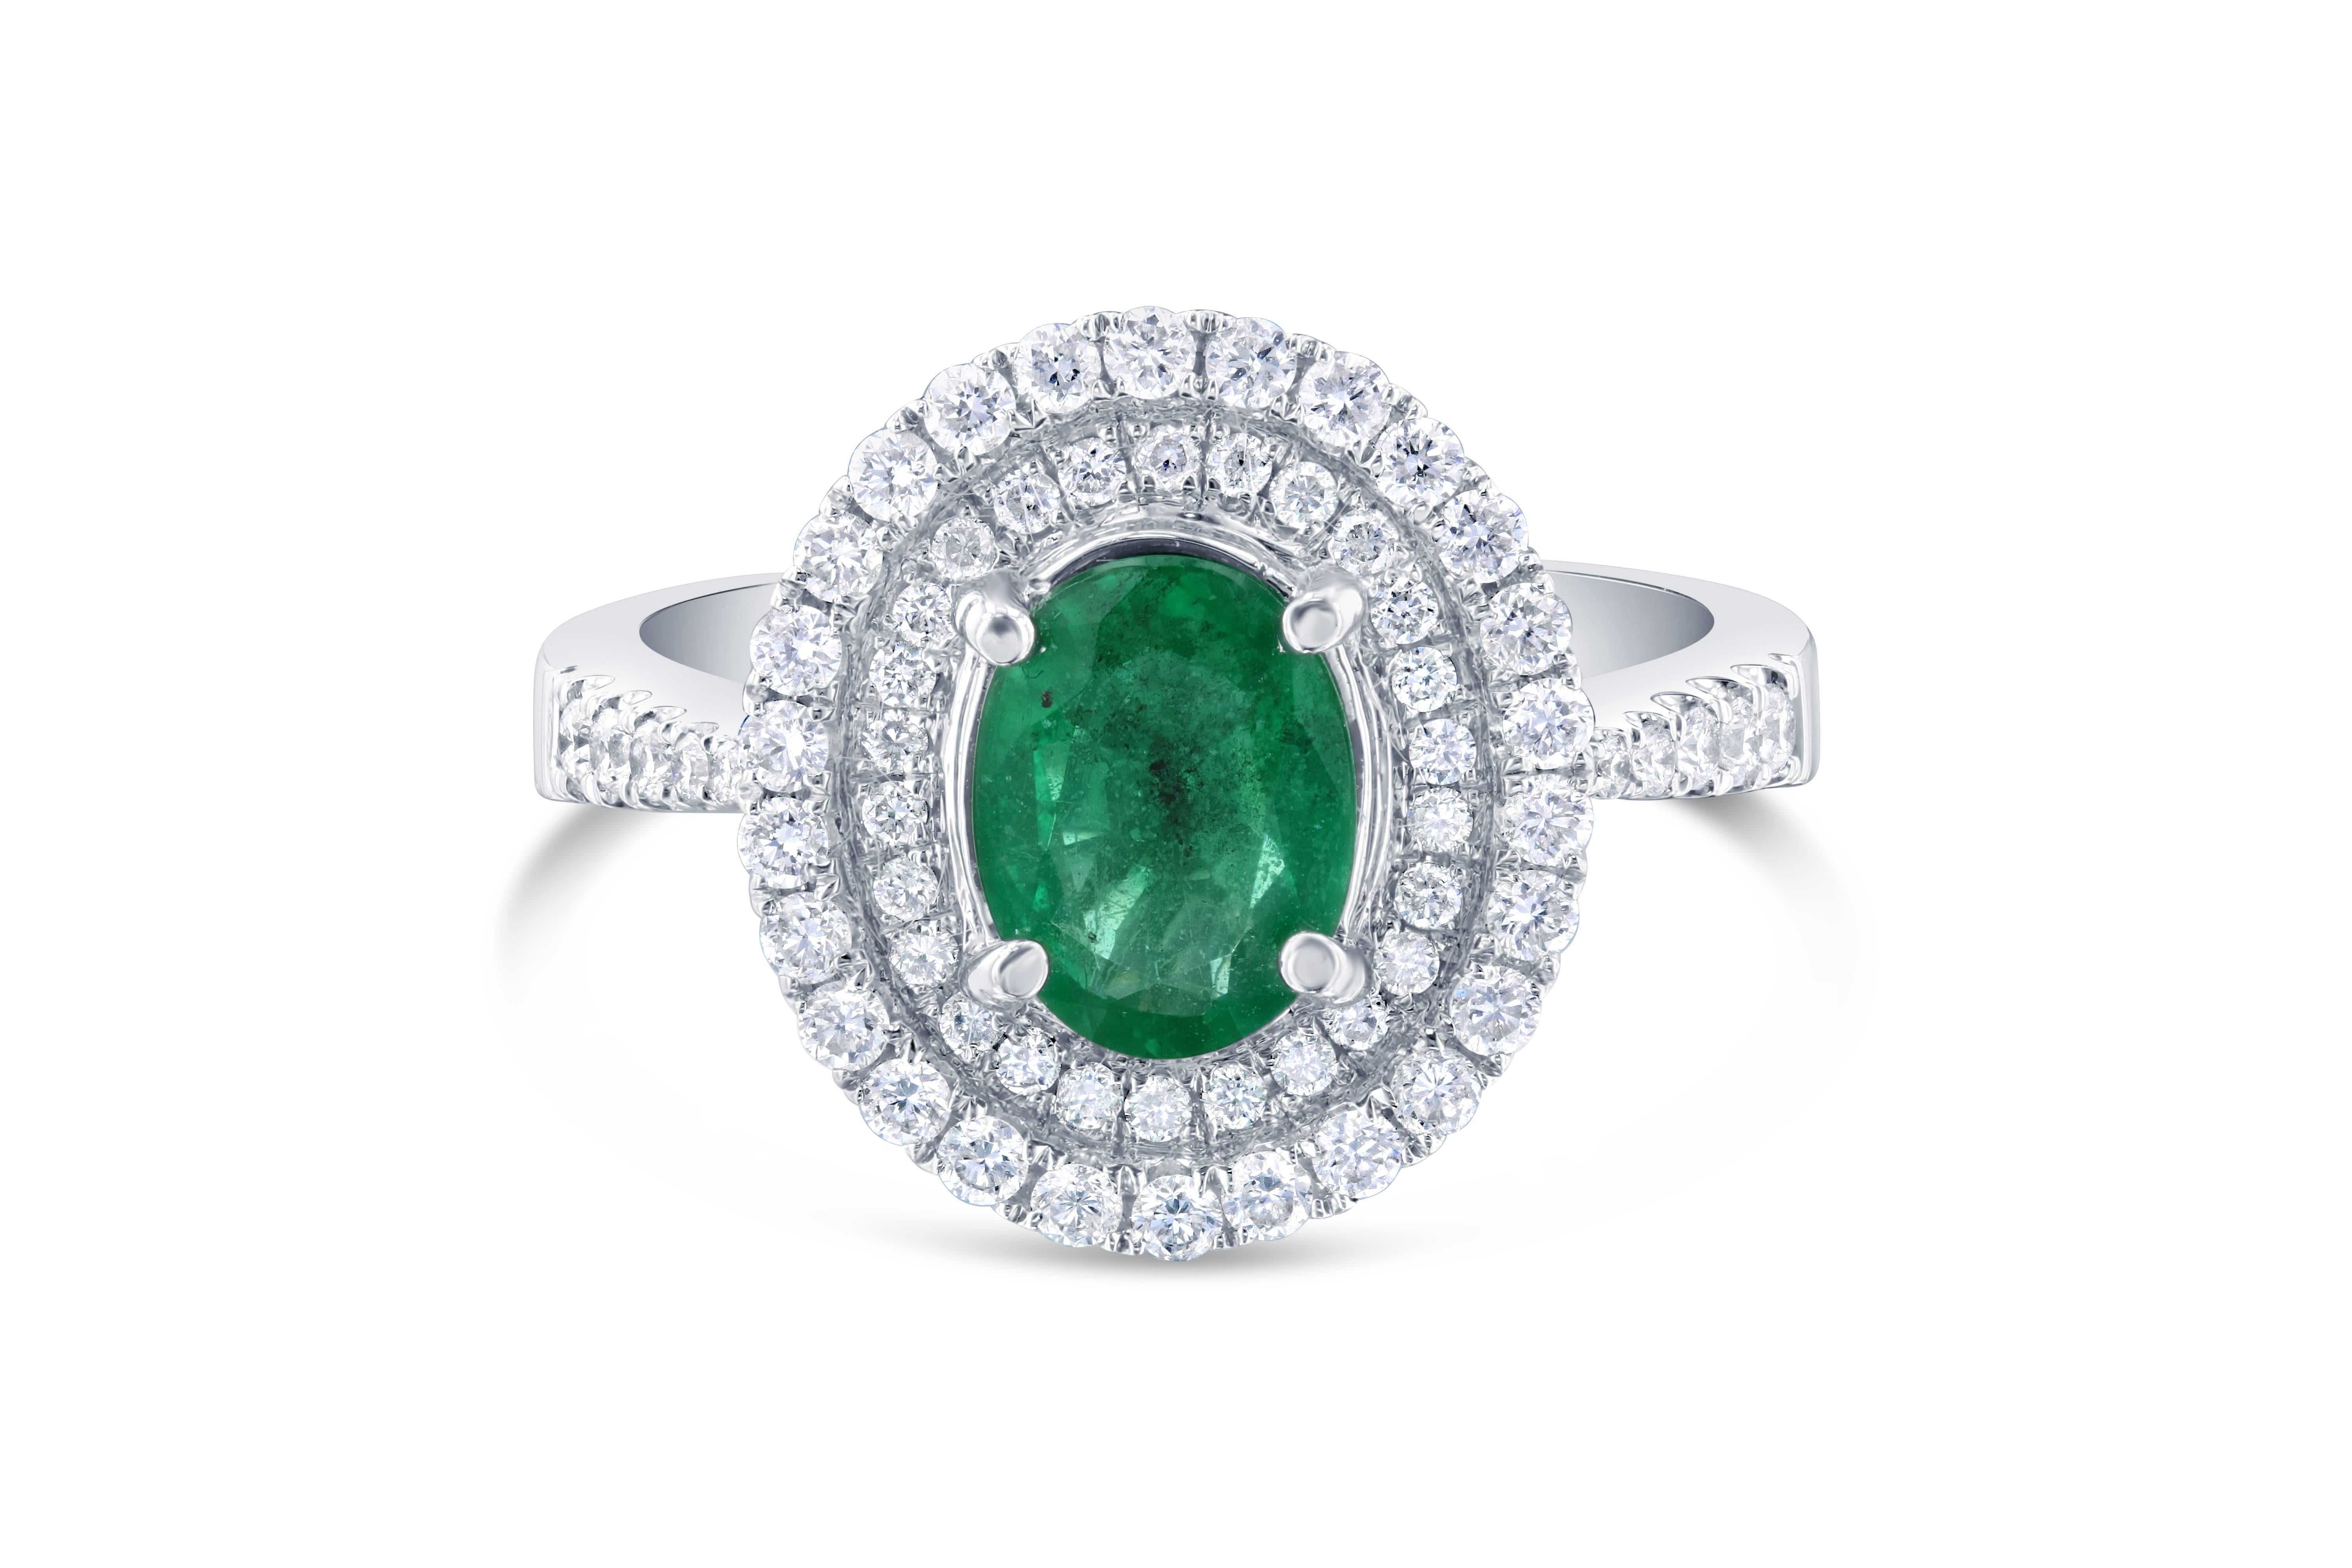 Stunning Double Halo Oval Cut Emerald Engagement Ring! 

This Emerald ring has a gorgeous unique look. The center oval cut Emerald is 1.00 Carat and has a Halo of 62 Round Cut Diamonds weighing 0.58 Carats. The clarity and color of the diamonds are